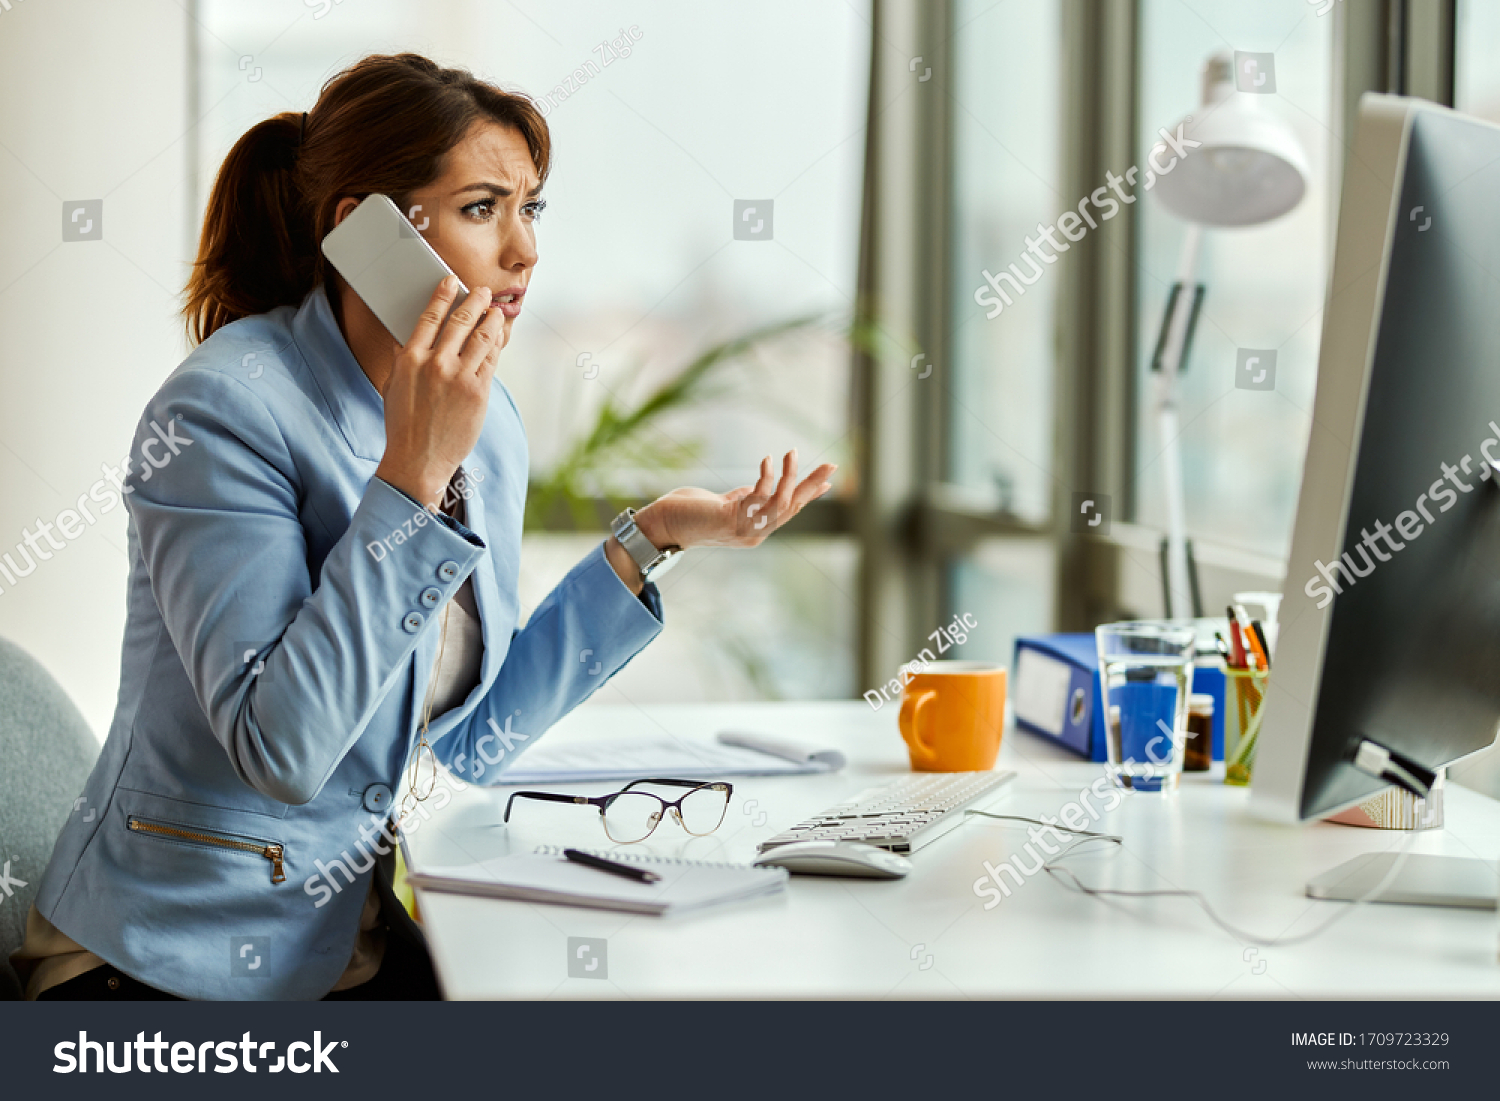 Young displeased businesswoman communicating over mobile phone while working on a computer in the office.  #1709723329